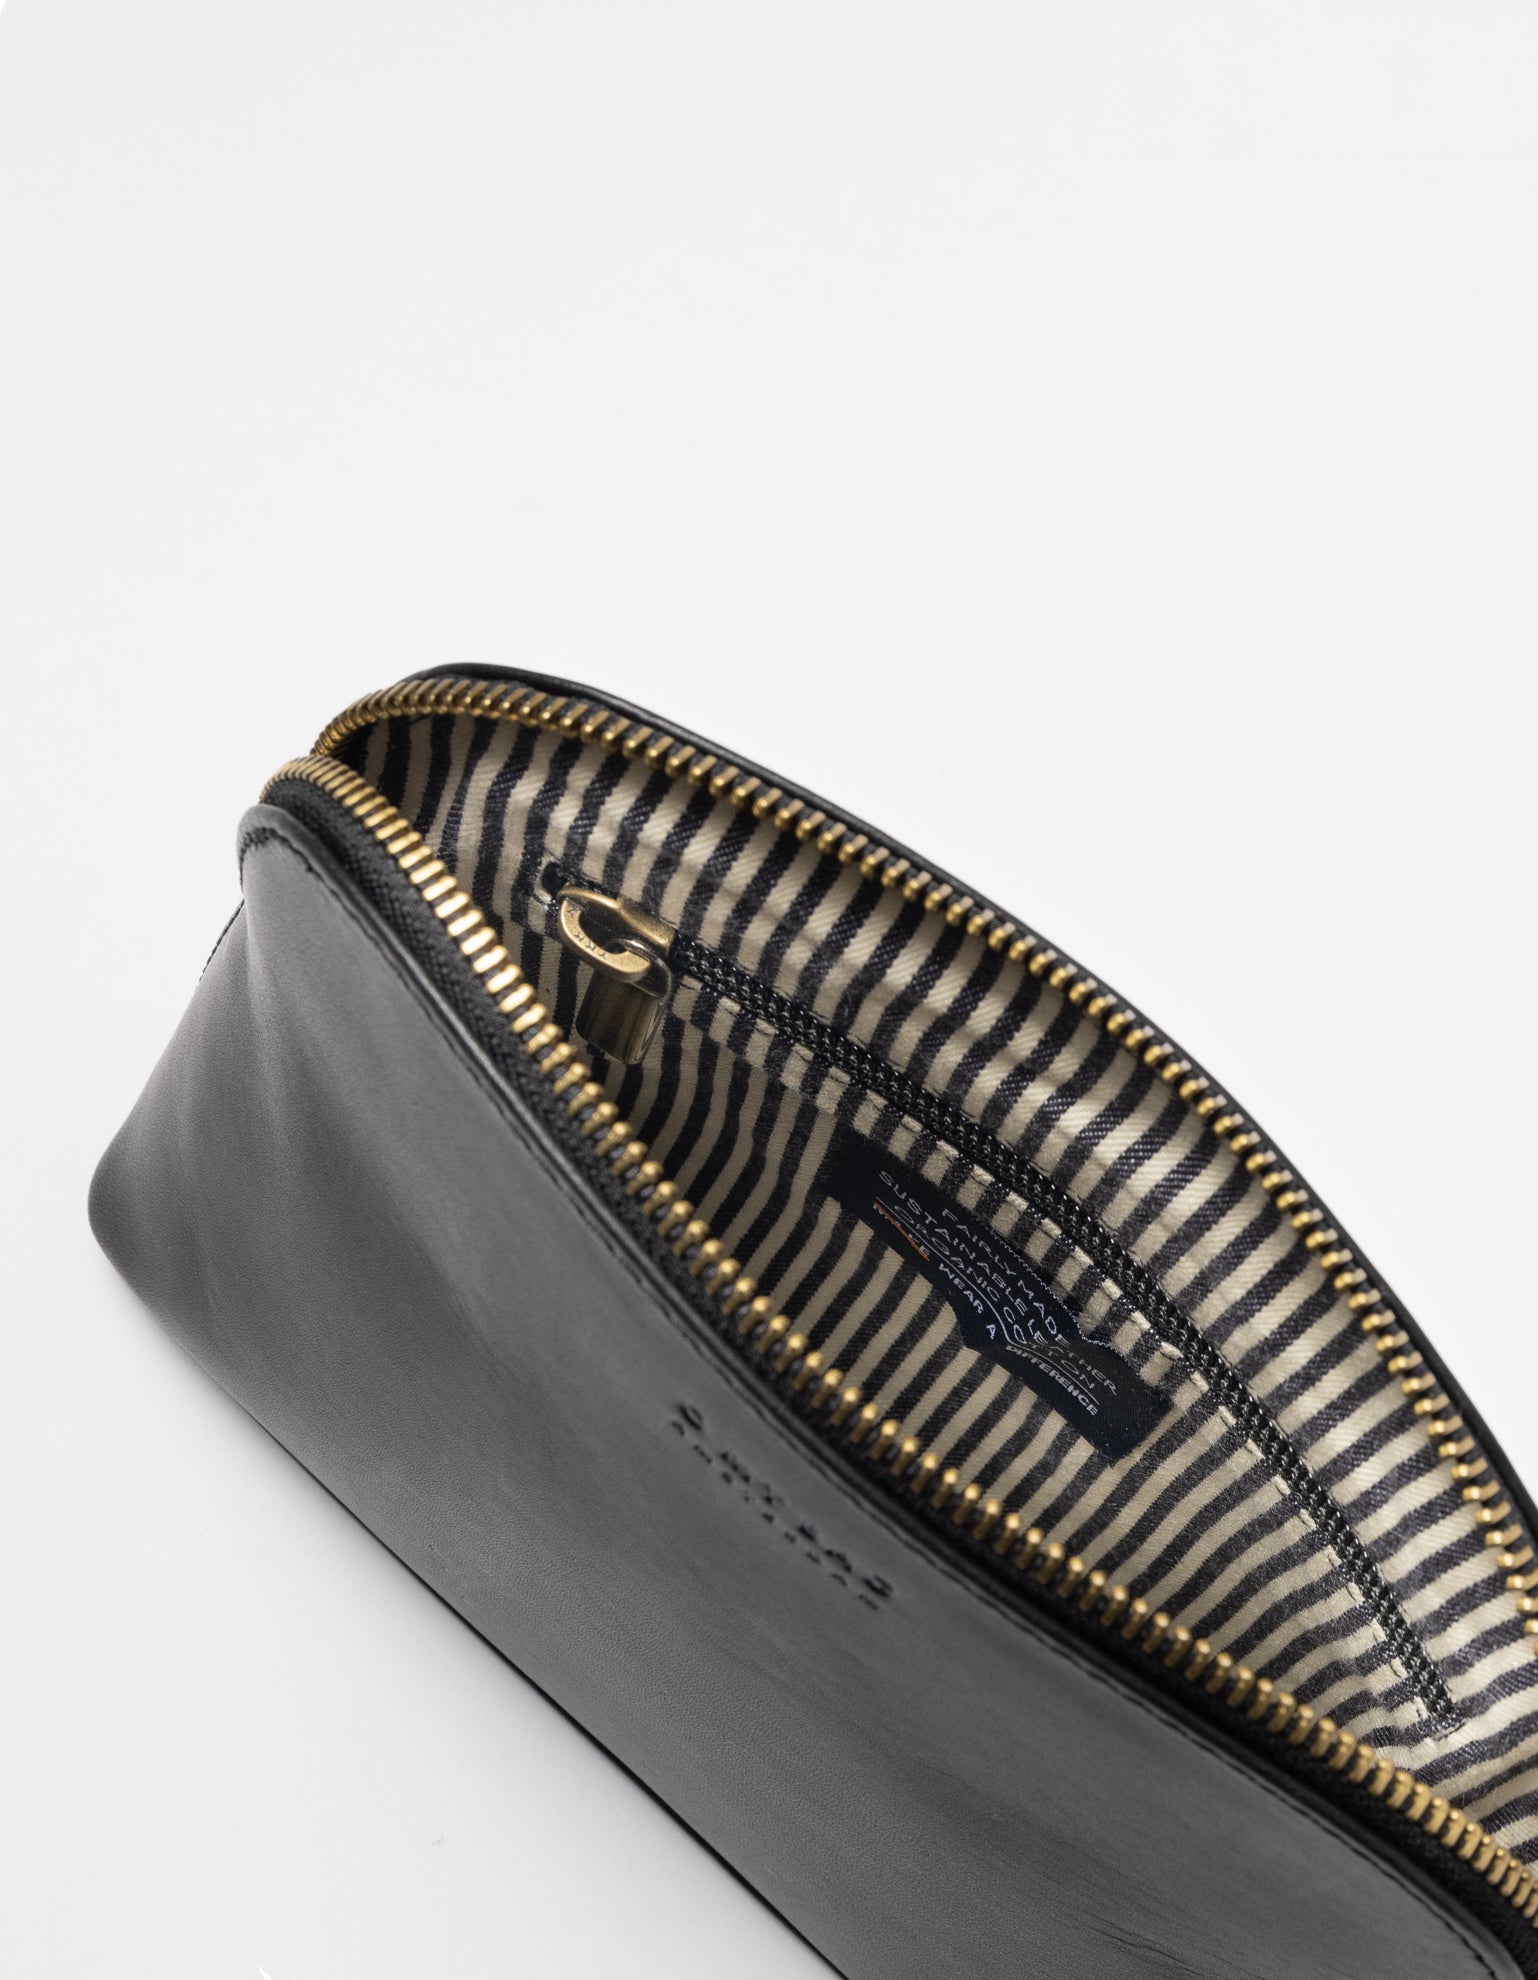 Leather cosmetic bag - inside image